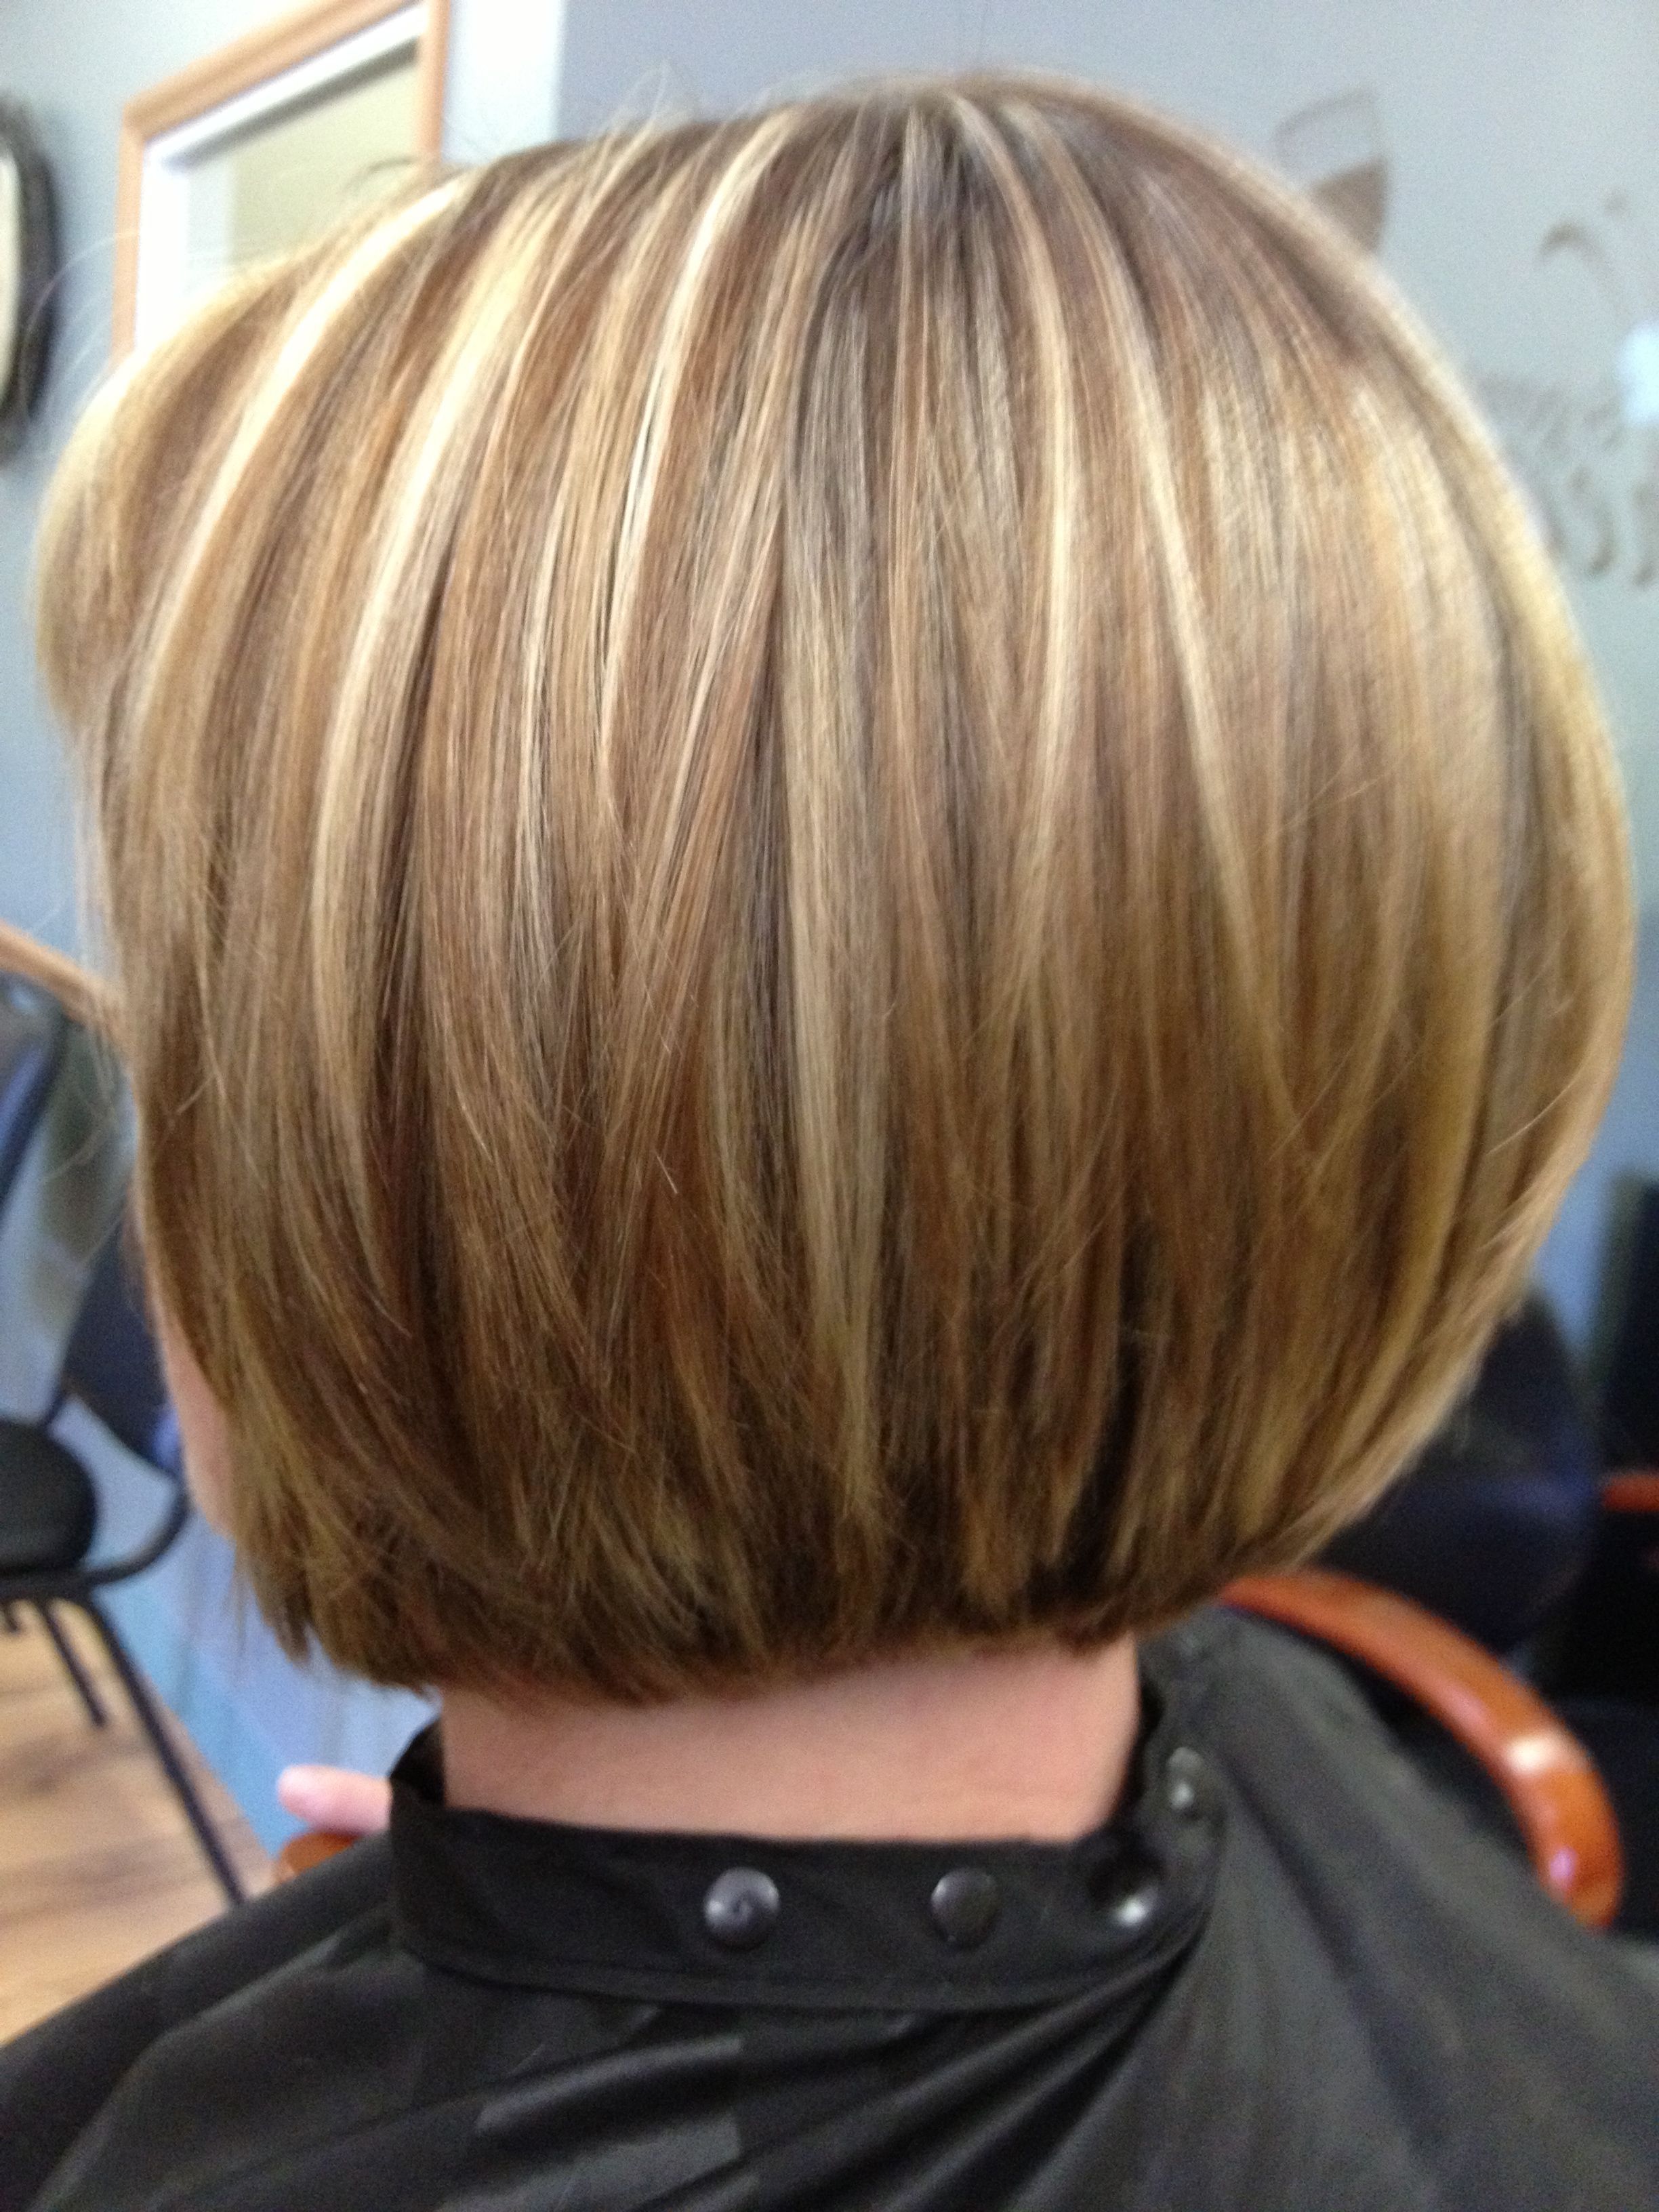 Hair Styles, Hair And Bob (View 17 of 20)